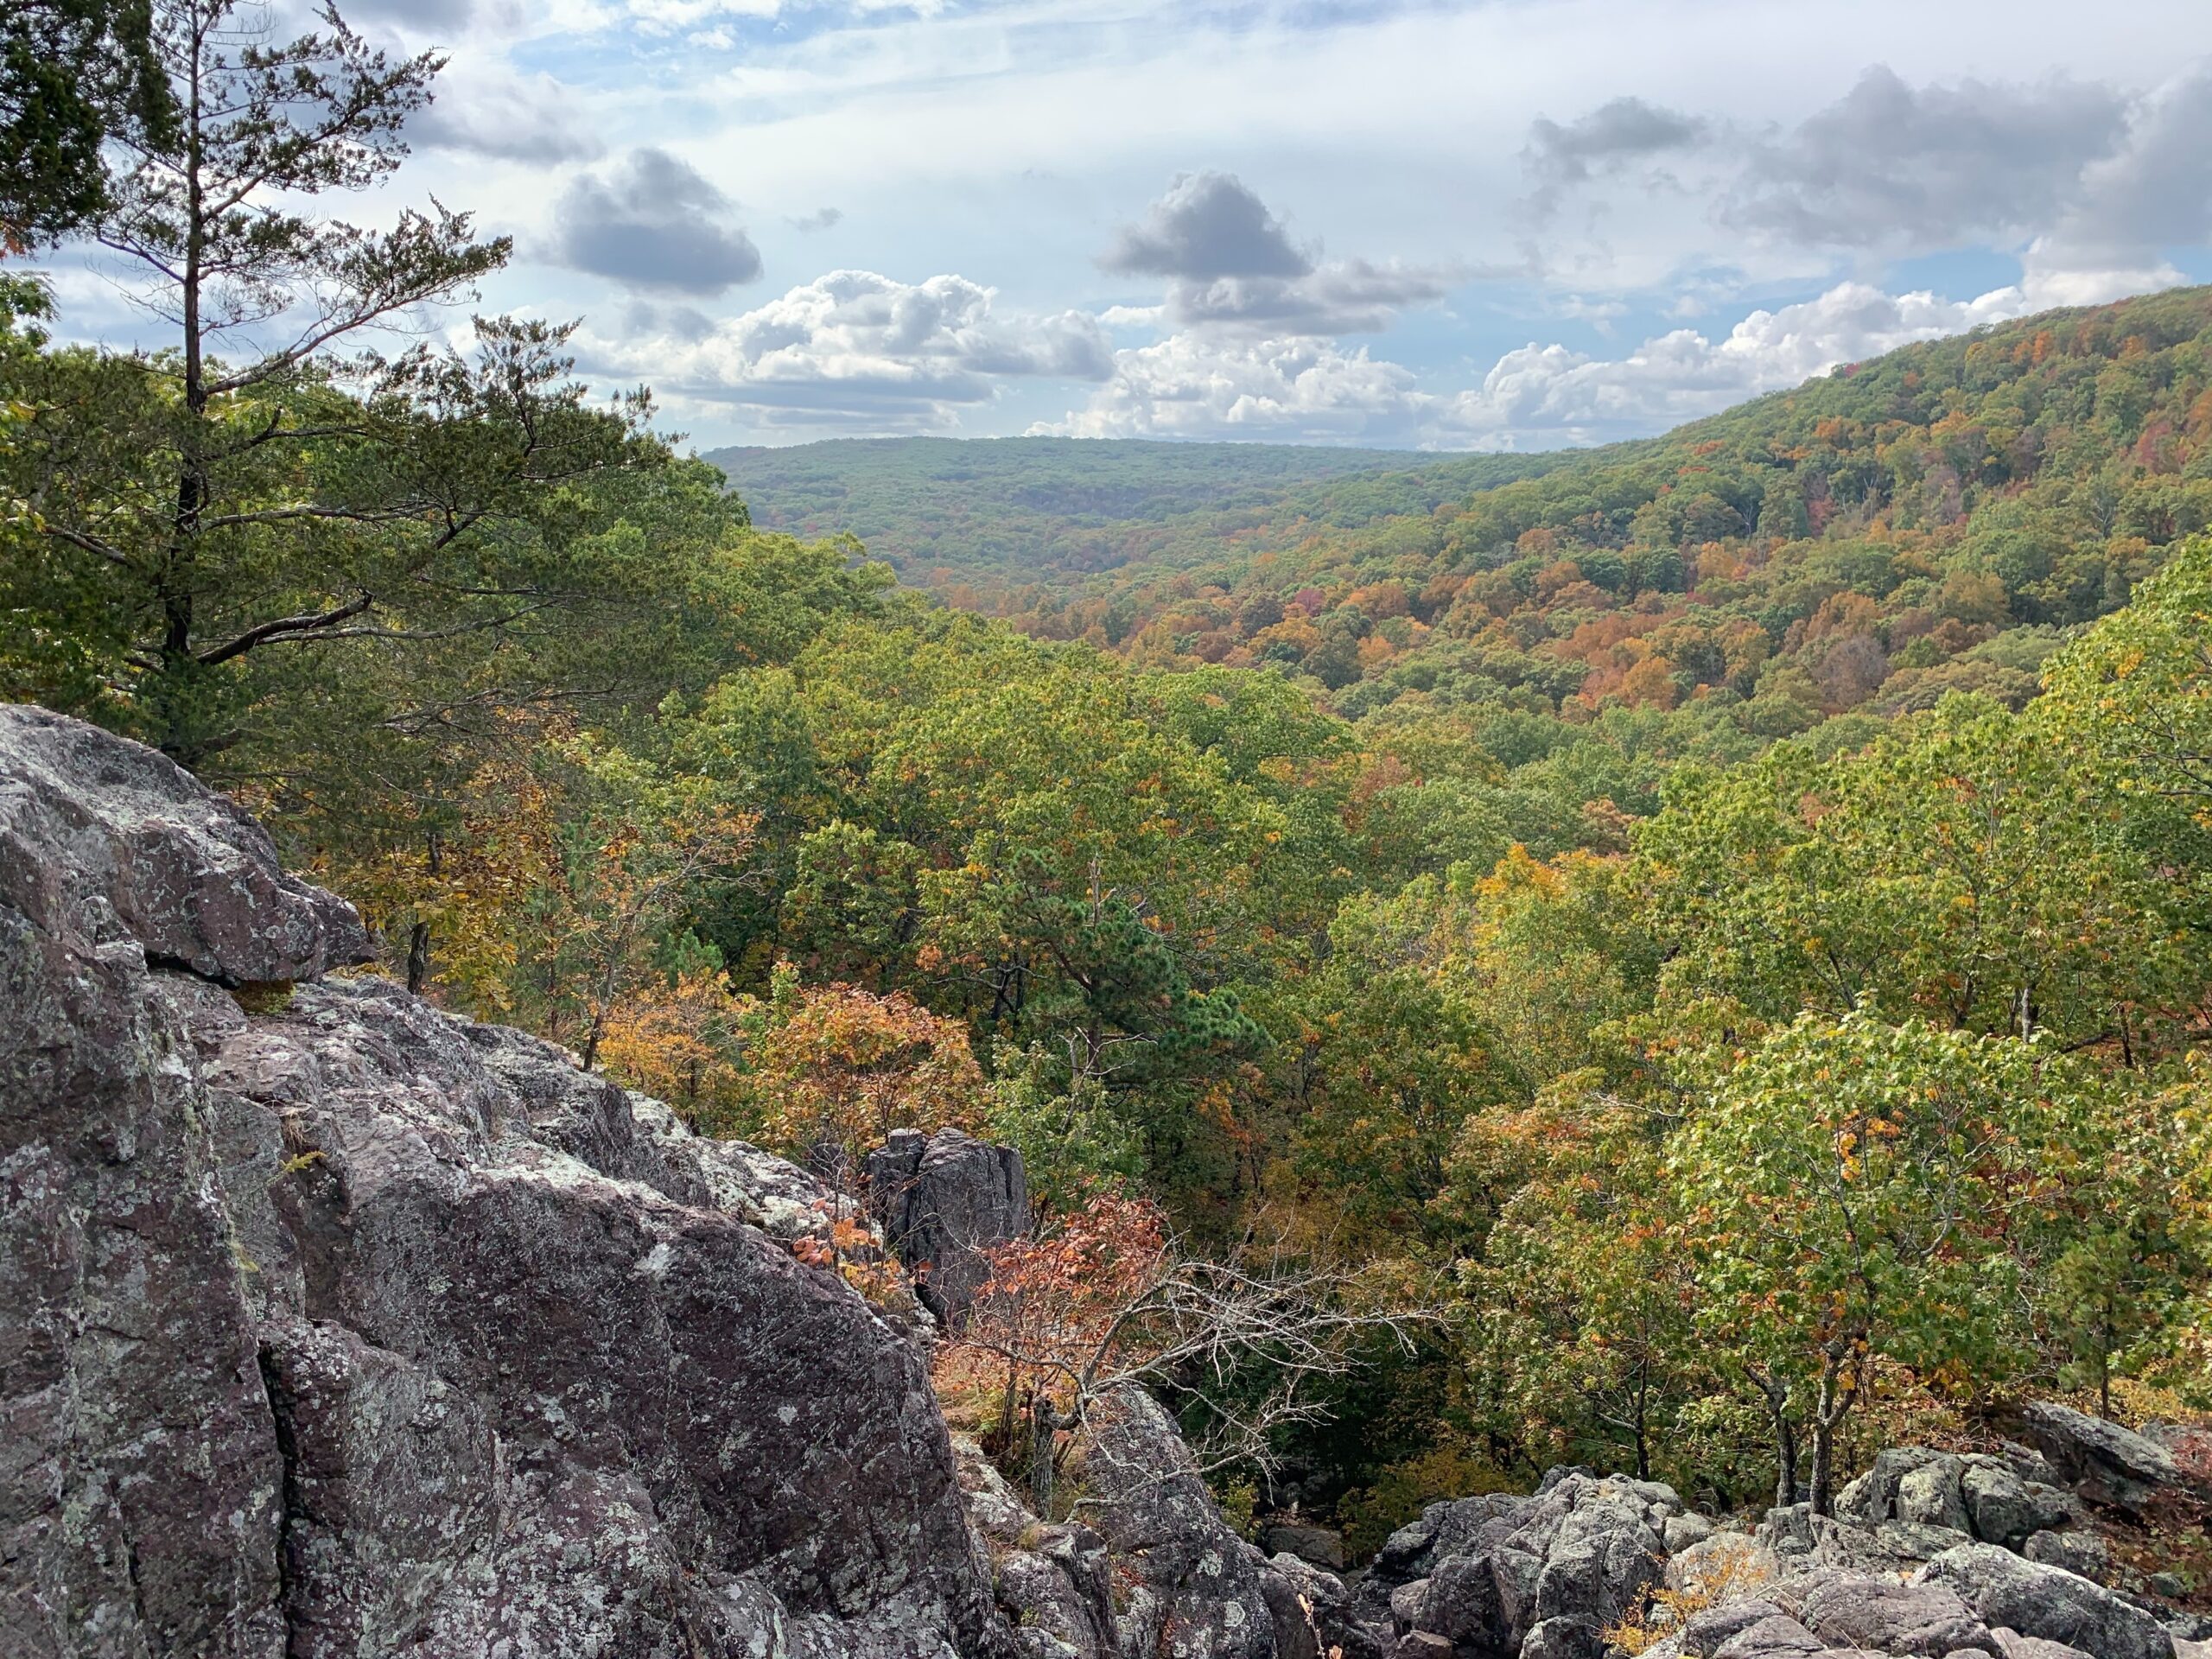 The Ozark Run: How one man’s vision became Missouri’s newest scenic byway.